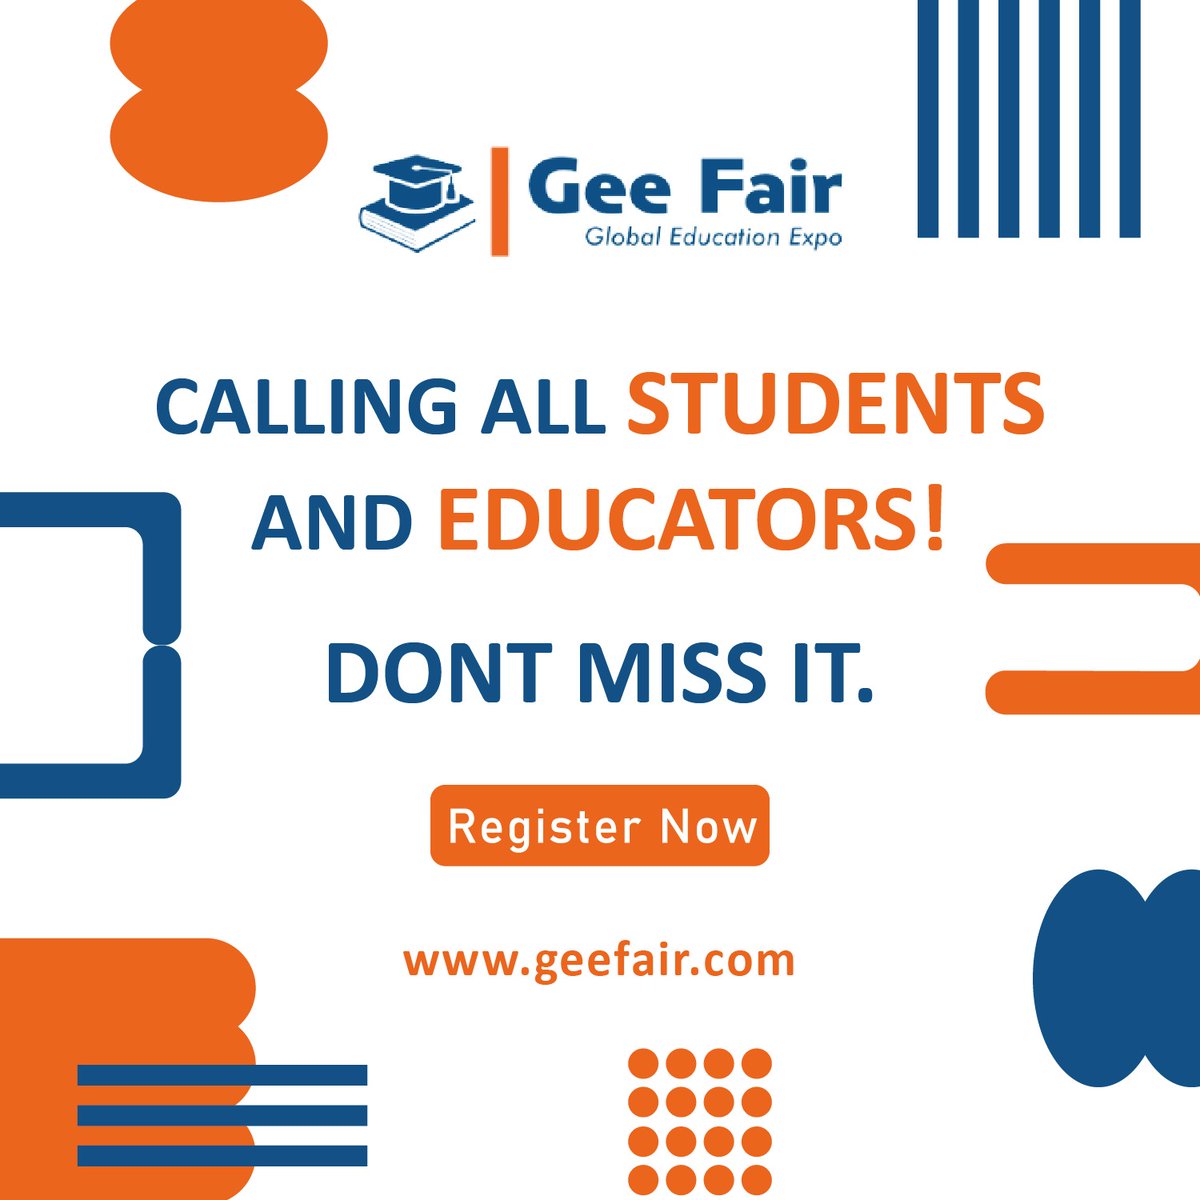 Calling all students and educators! The Gee Fair Global Education Expo is your one-stop shop for all things study abroad. 
.
.
.
#GeeFairGlobalEducationExpo #StudyAbroadOpportunities #TopUniversities #ScholarshipOptions #ExploreYourOptions #StudyAbroadEvent #EducationFair